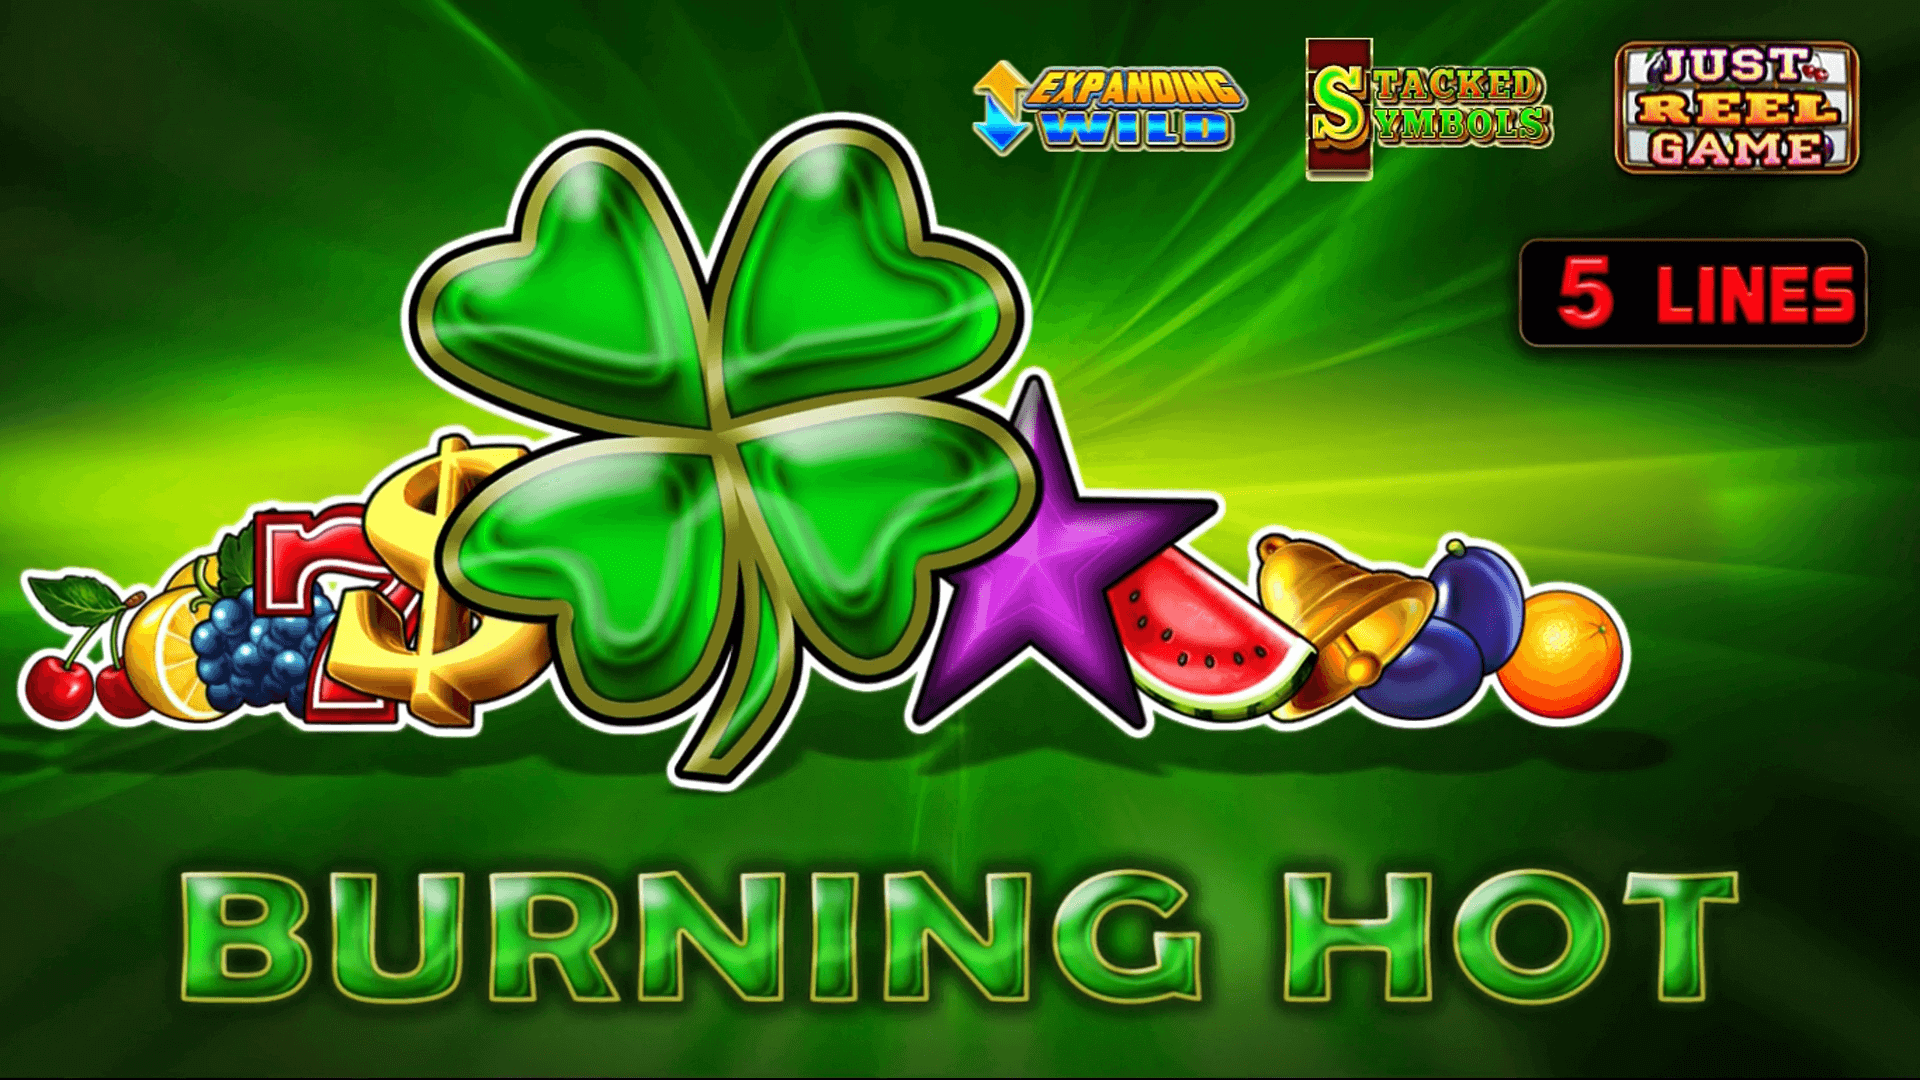 egt games collection series gold collection hd burning hot 2